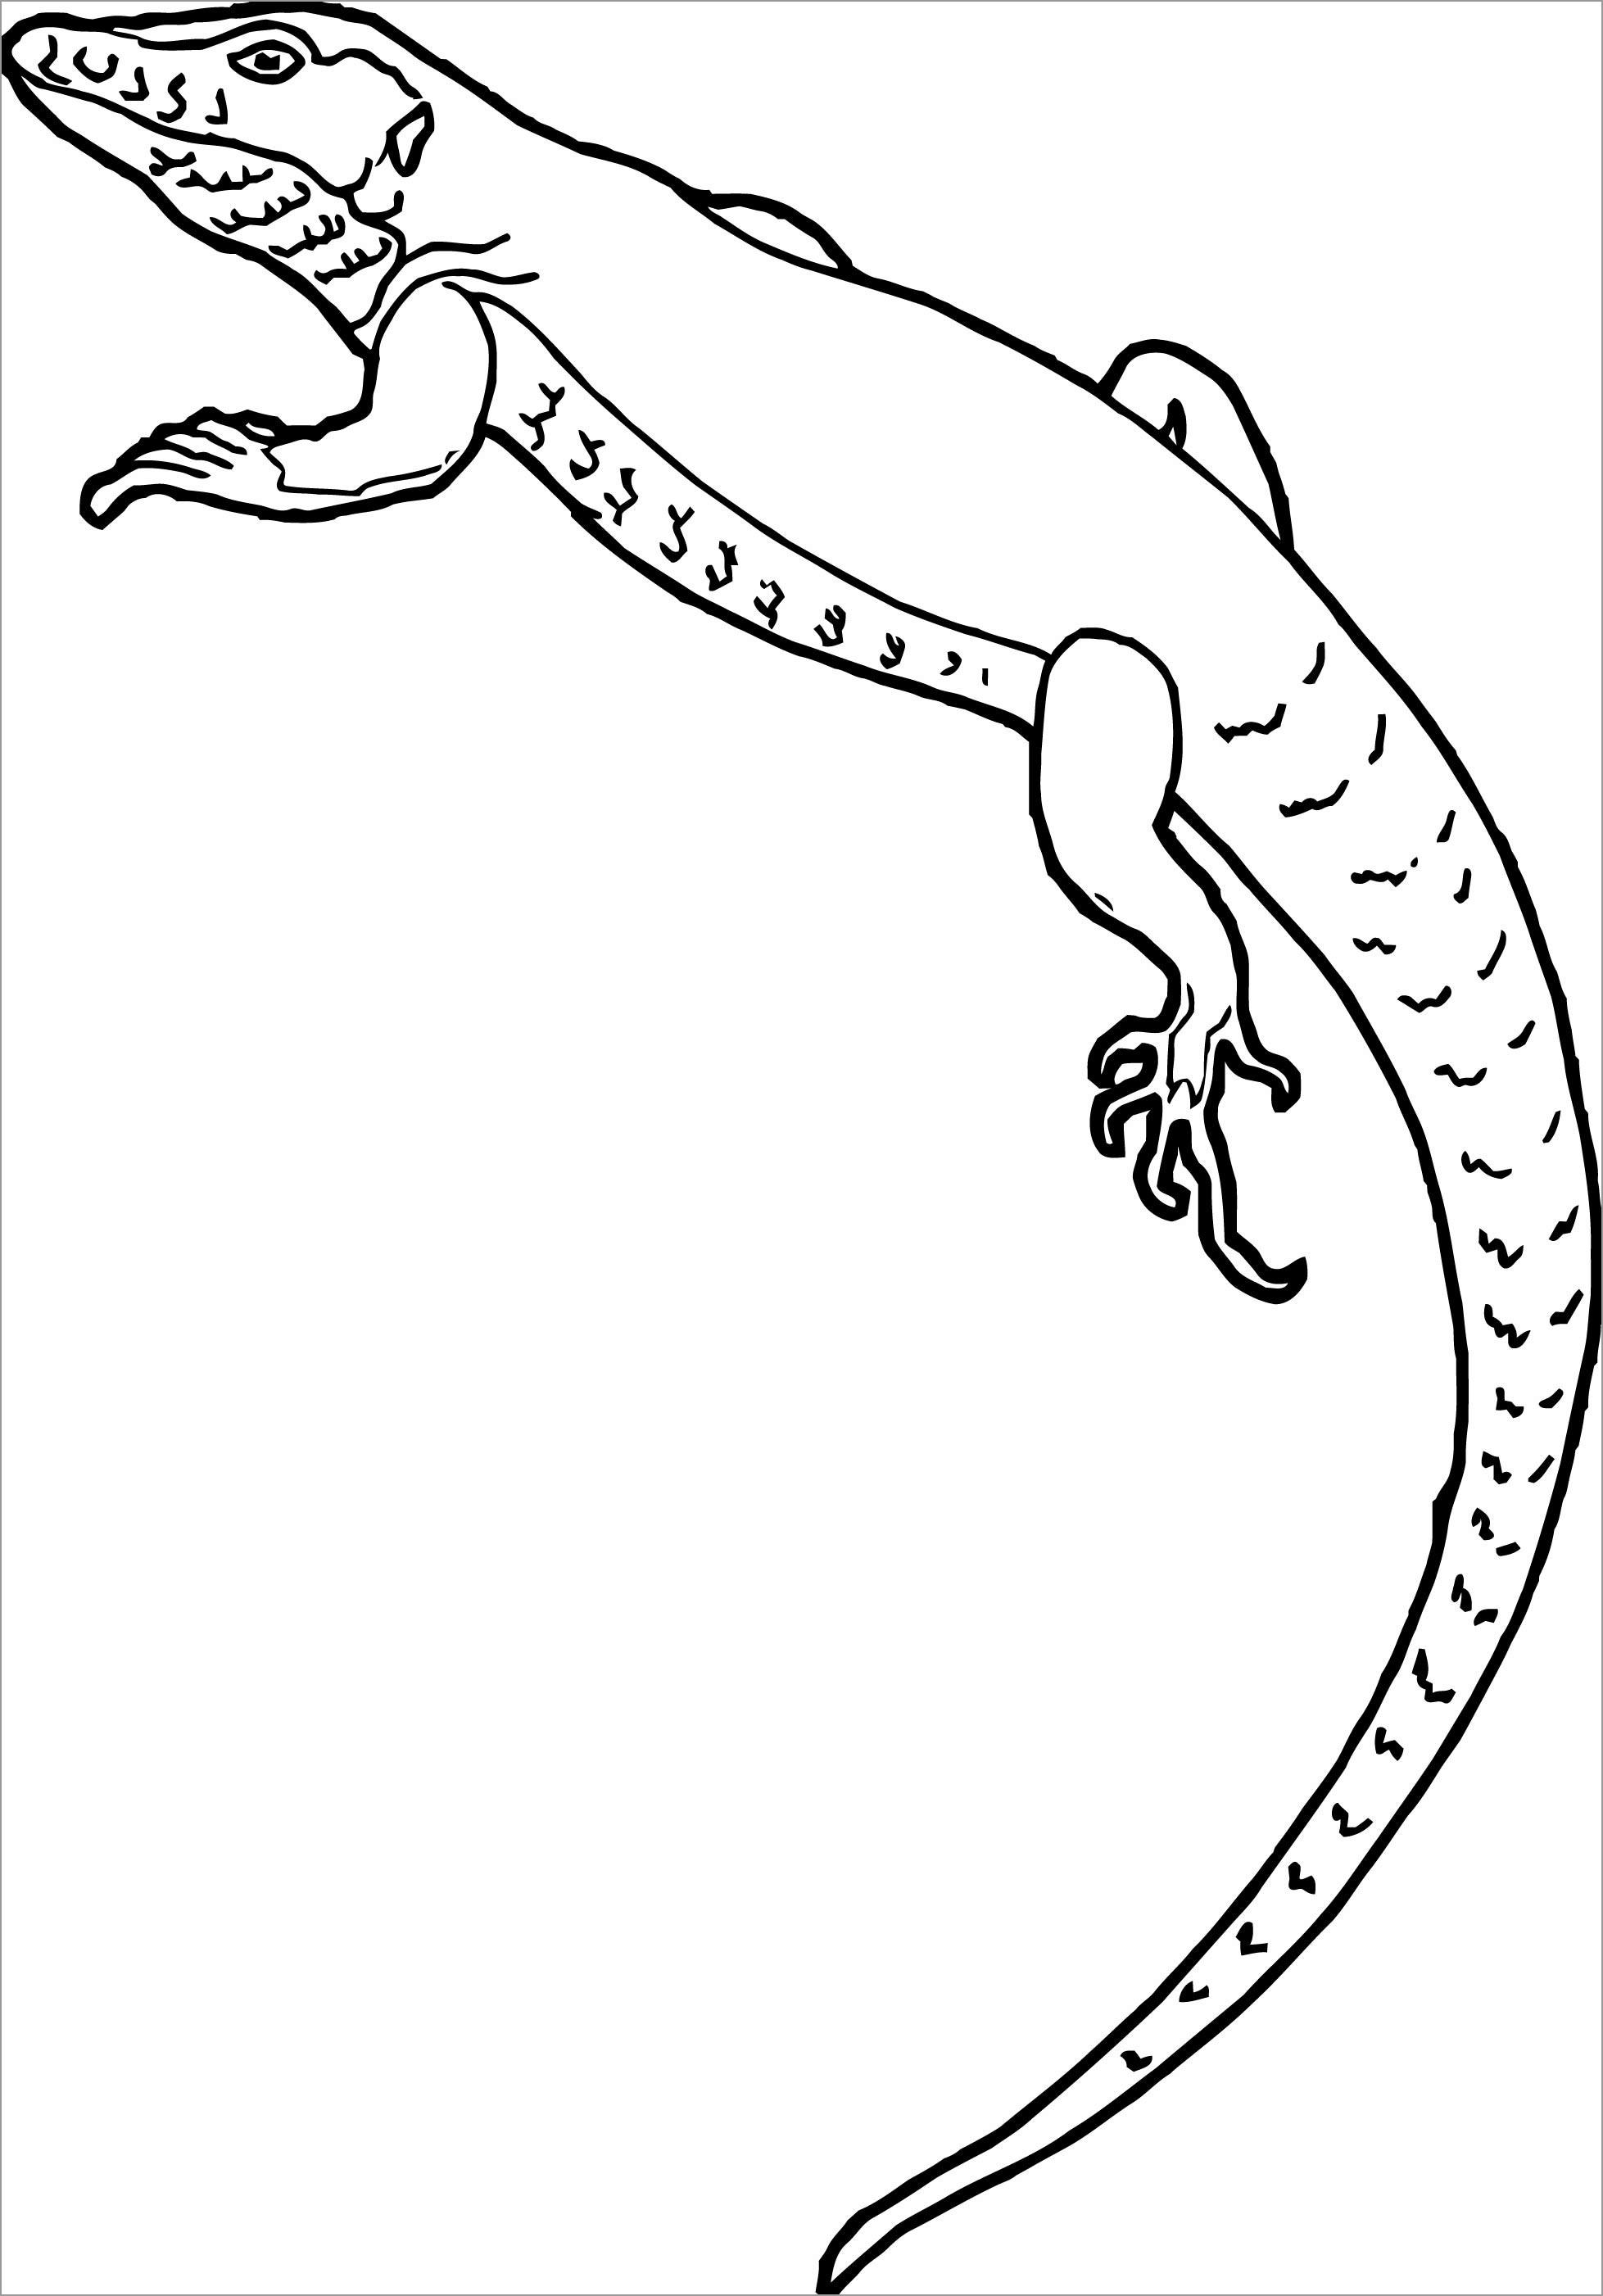 lizards-coloring-pages-coloringbay